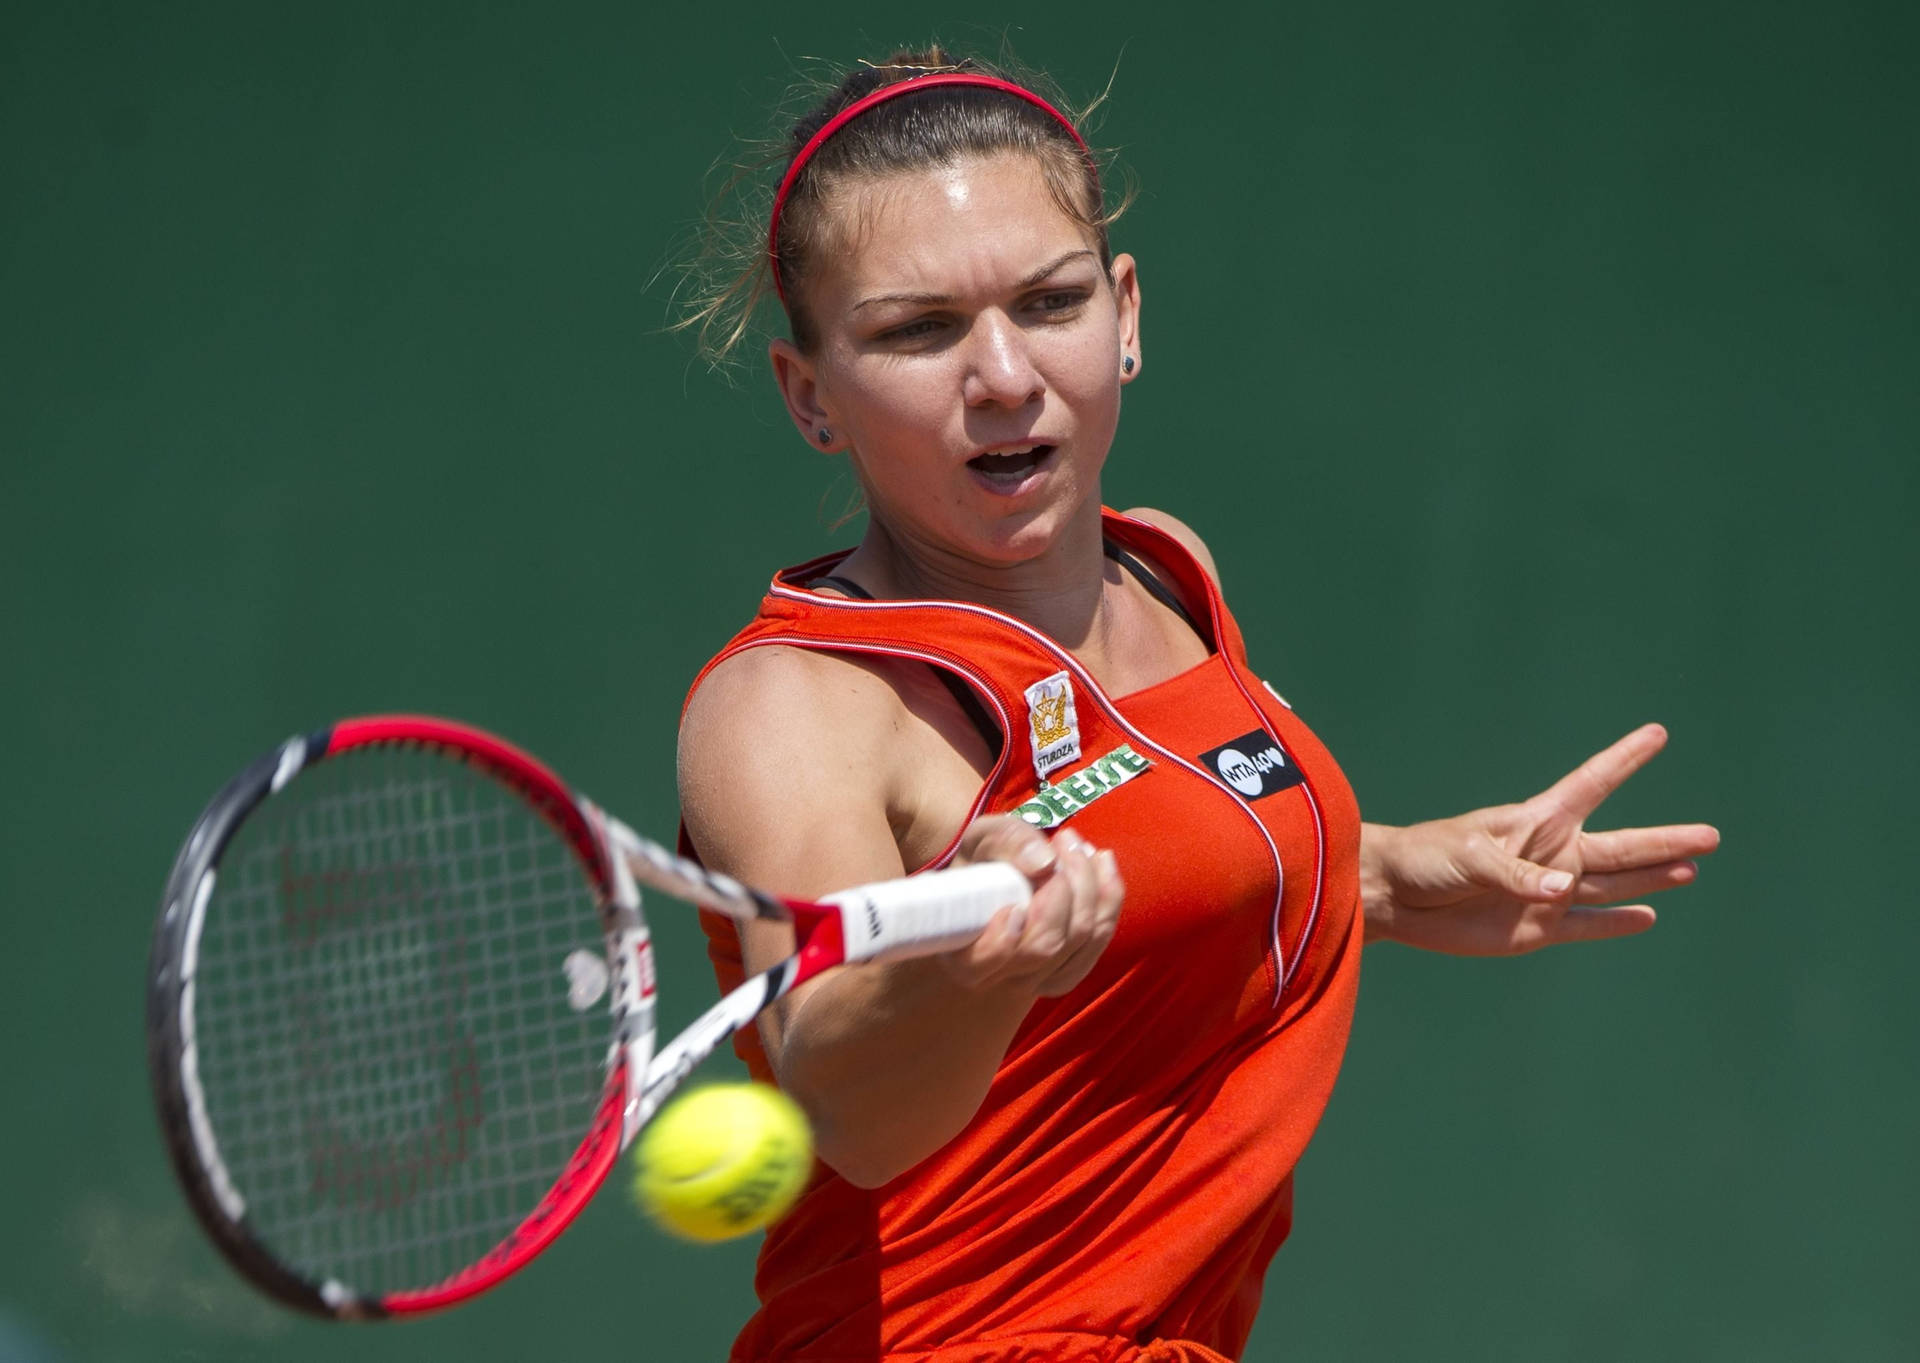 Simona Halep in action performing a powerful forehand. Wallpaper